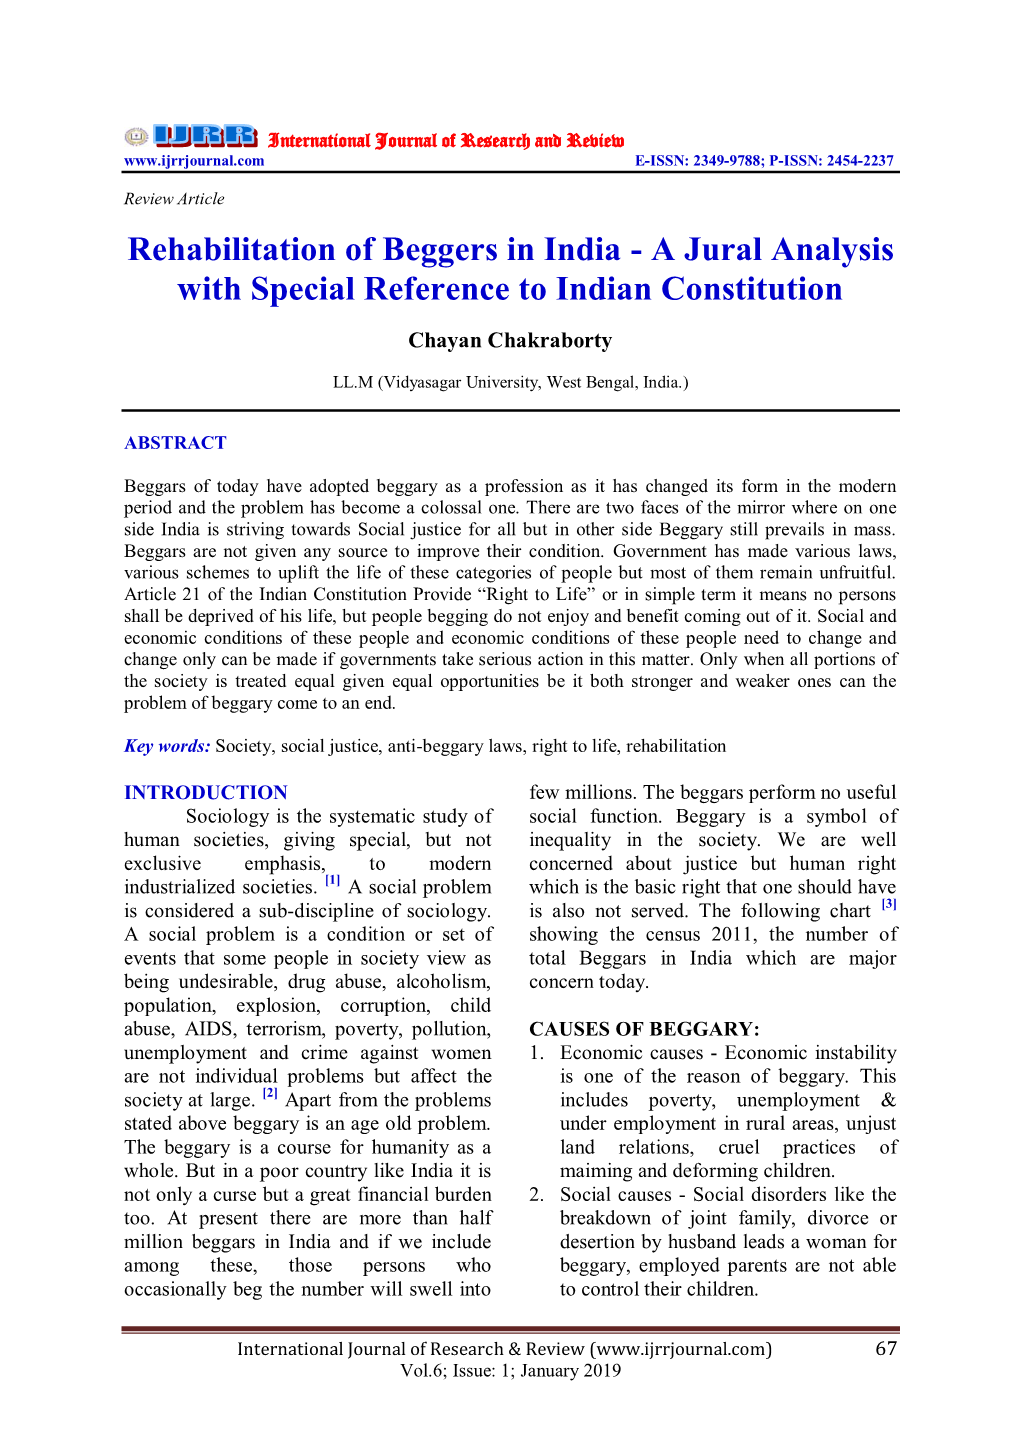 Rehabilitation of Beggers in India - a Jural Analysis with Special Reference to Indian Constitution